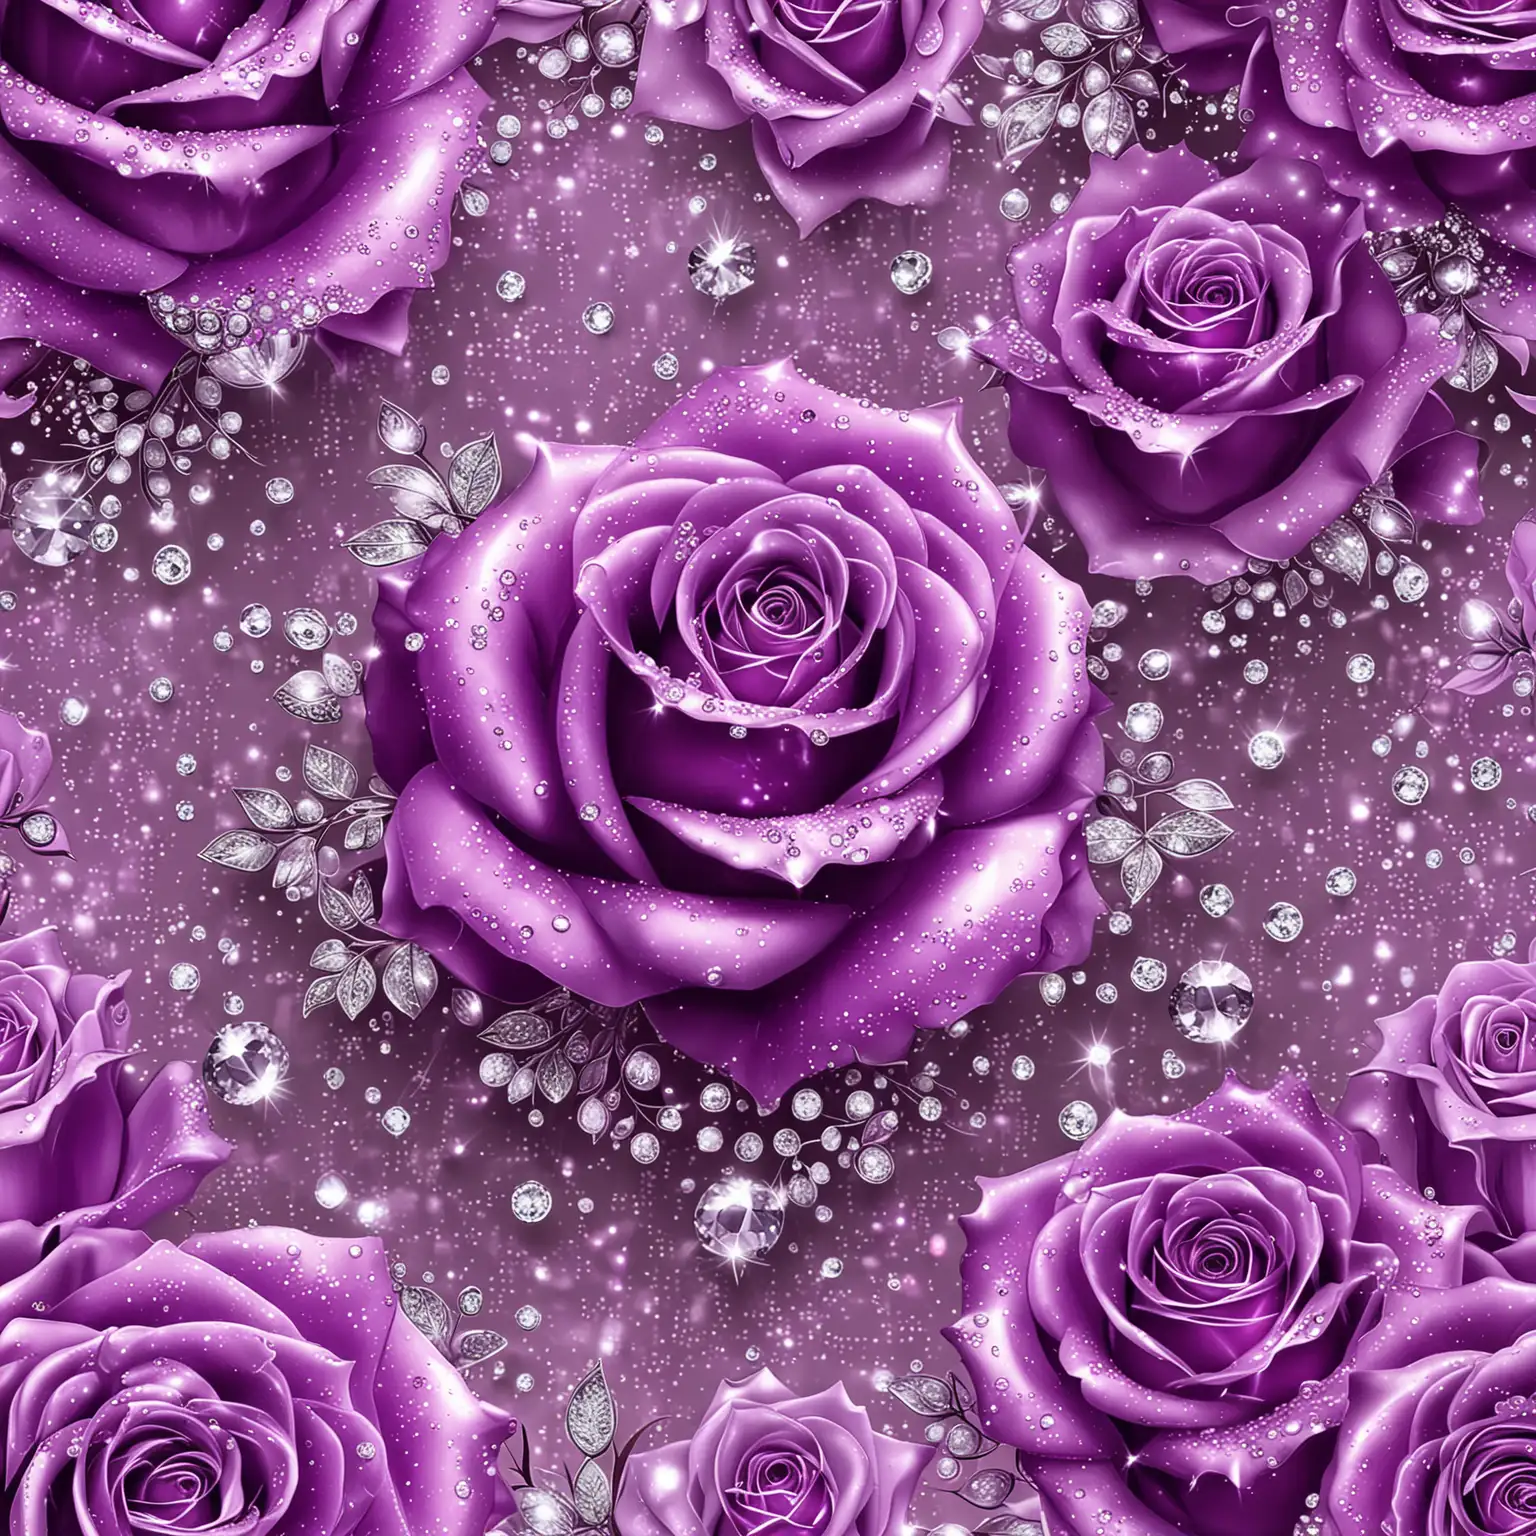 Luscious Purple Roses on a Bed of Diamonds